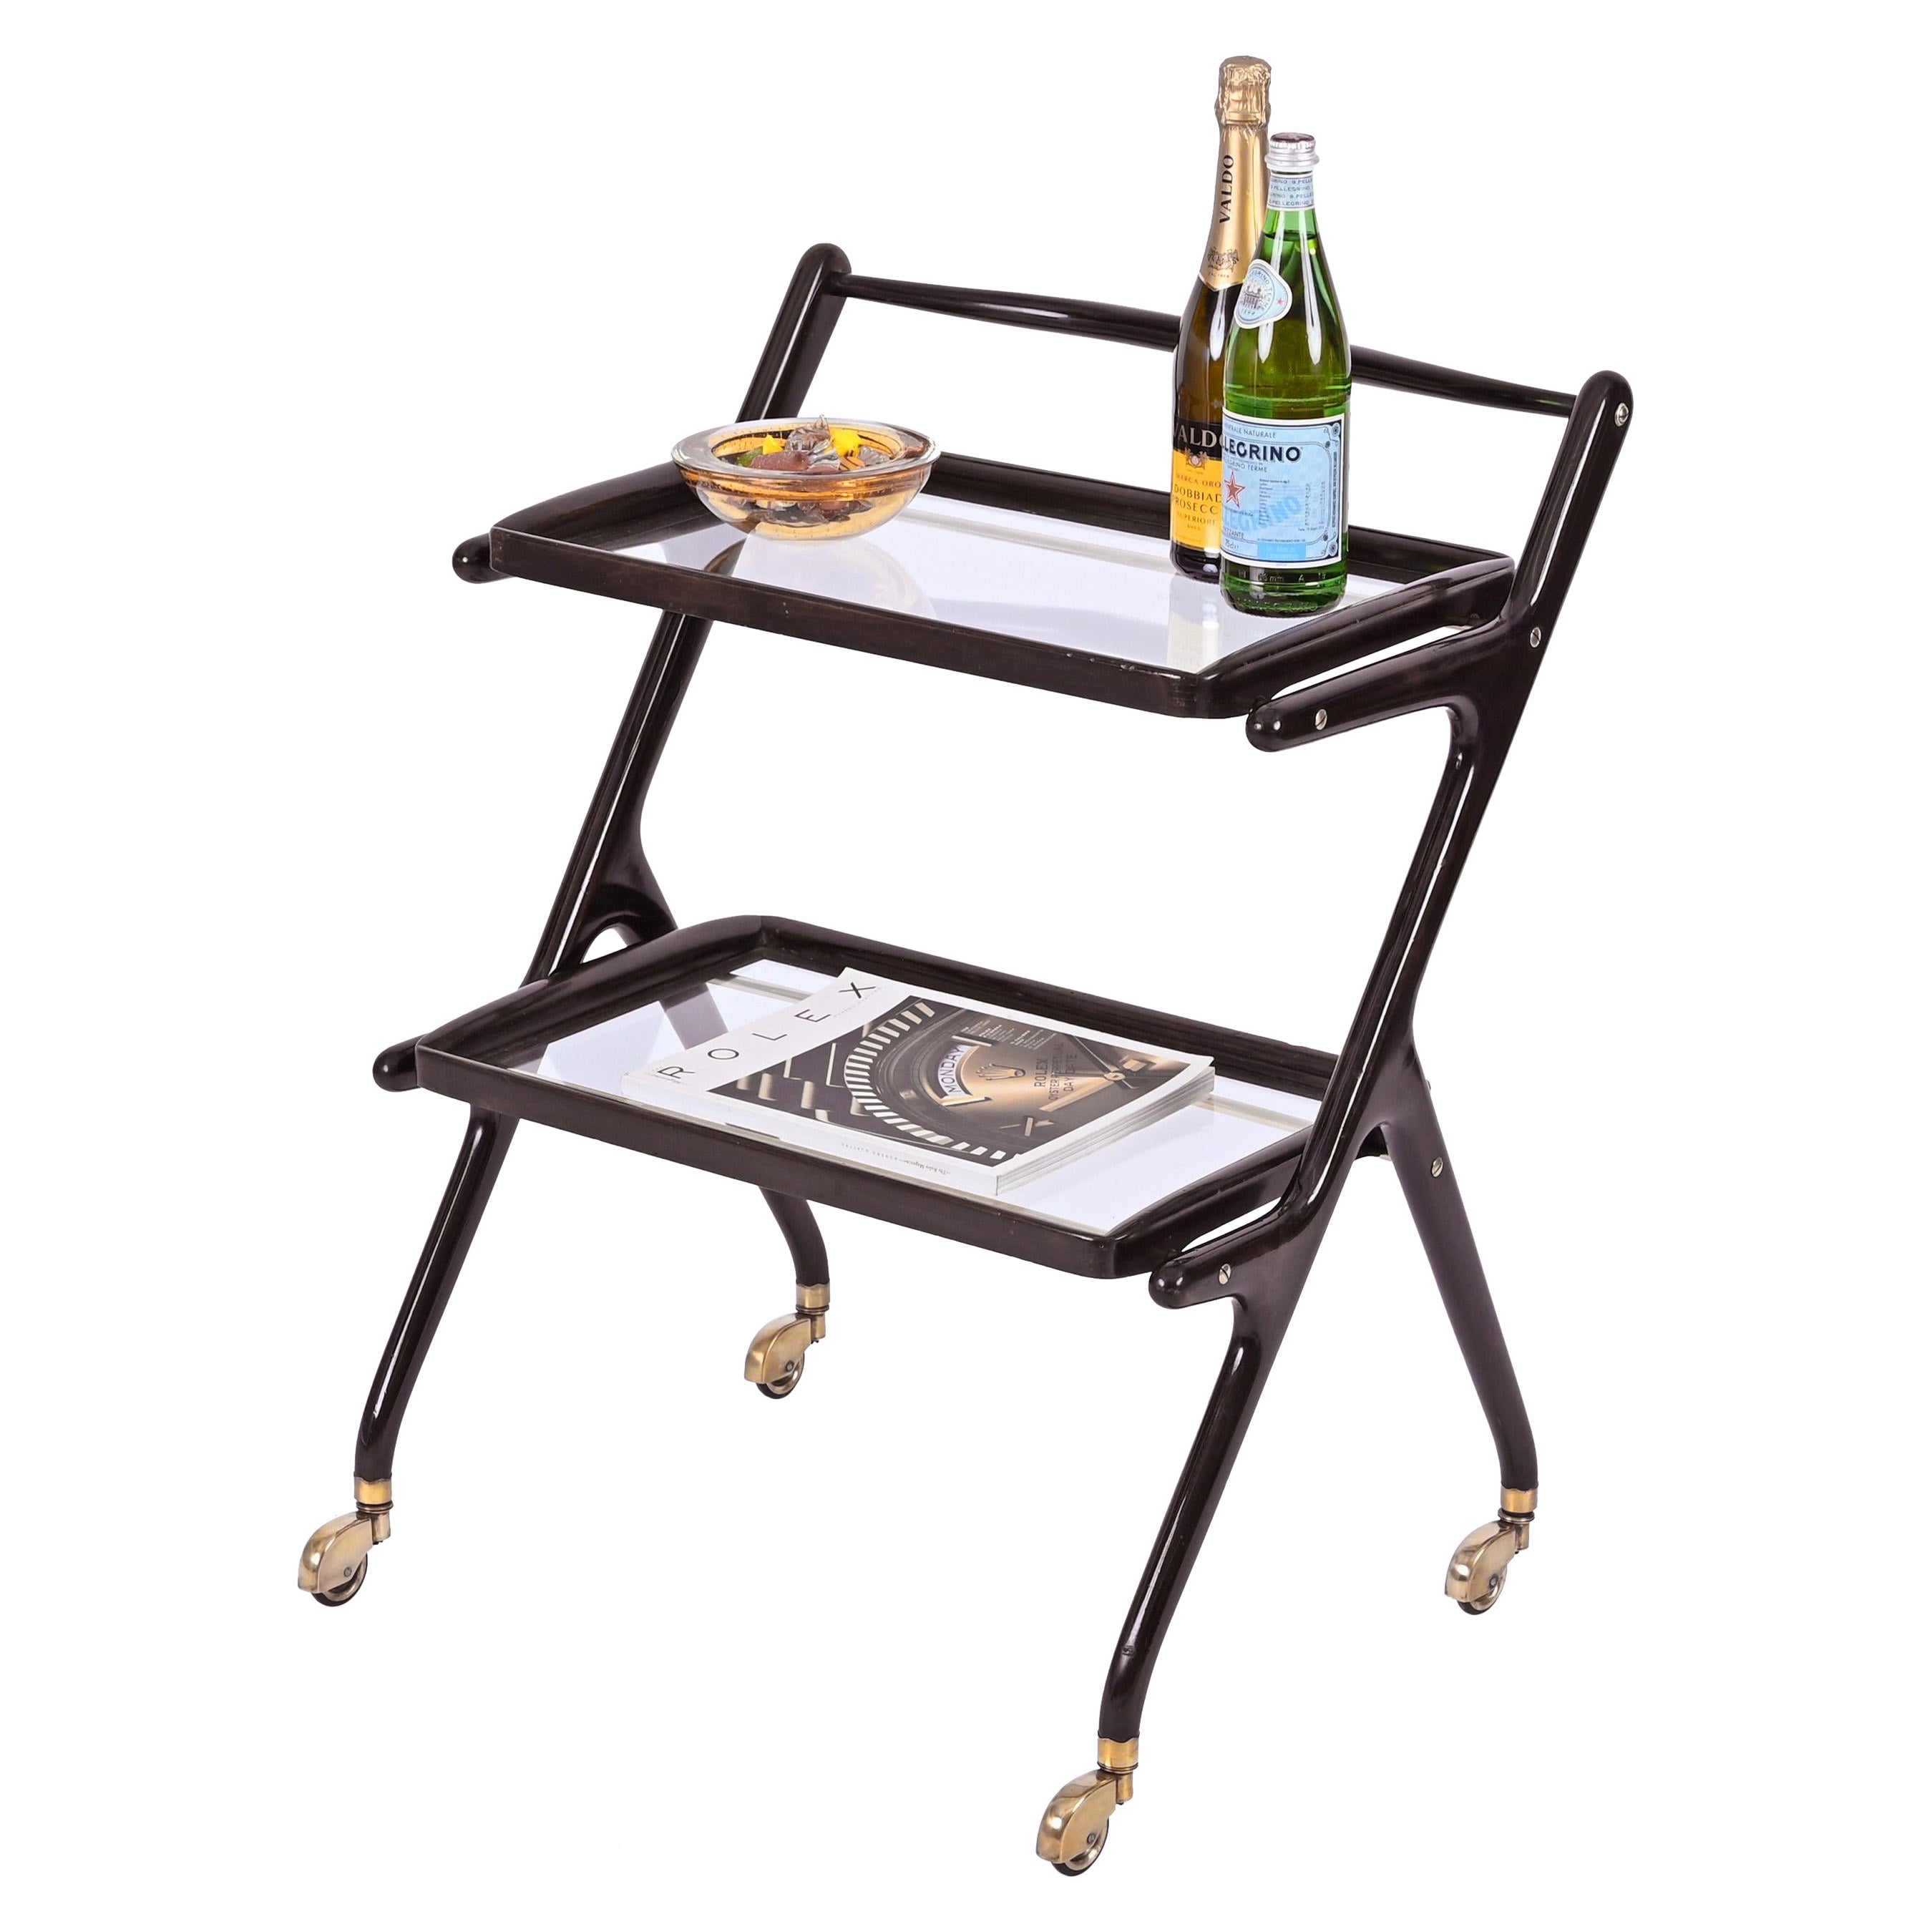 Cesare Lacca Midcentury Wood and Glass Italian Trolley Bar Cart, 1950s